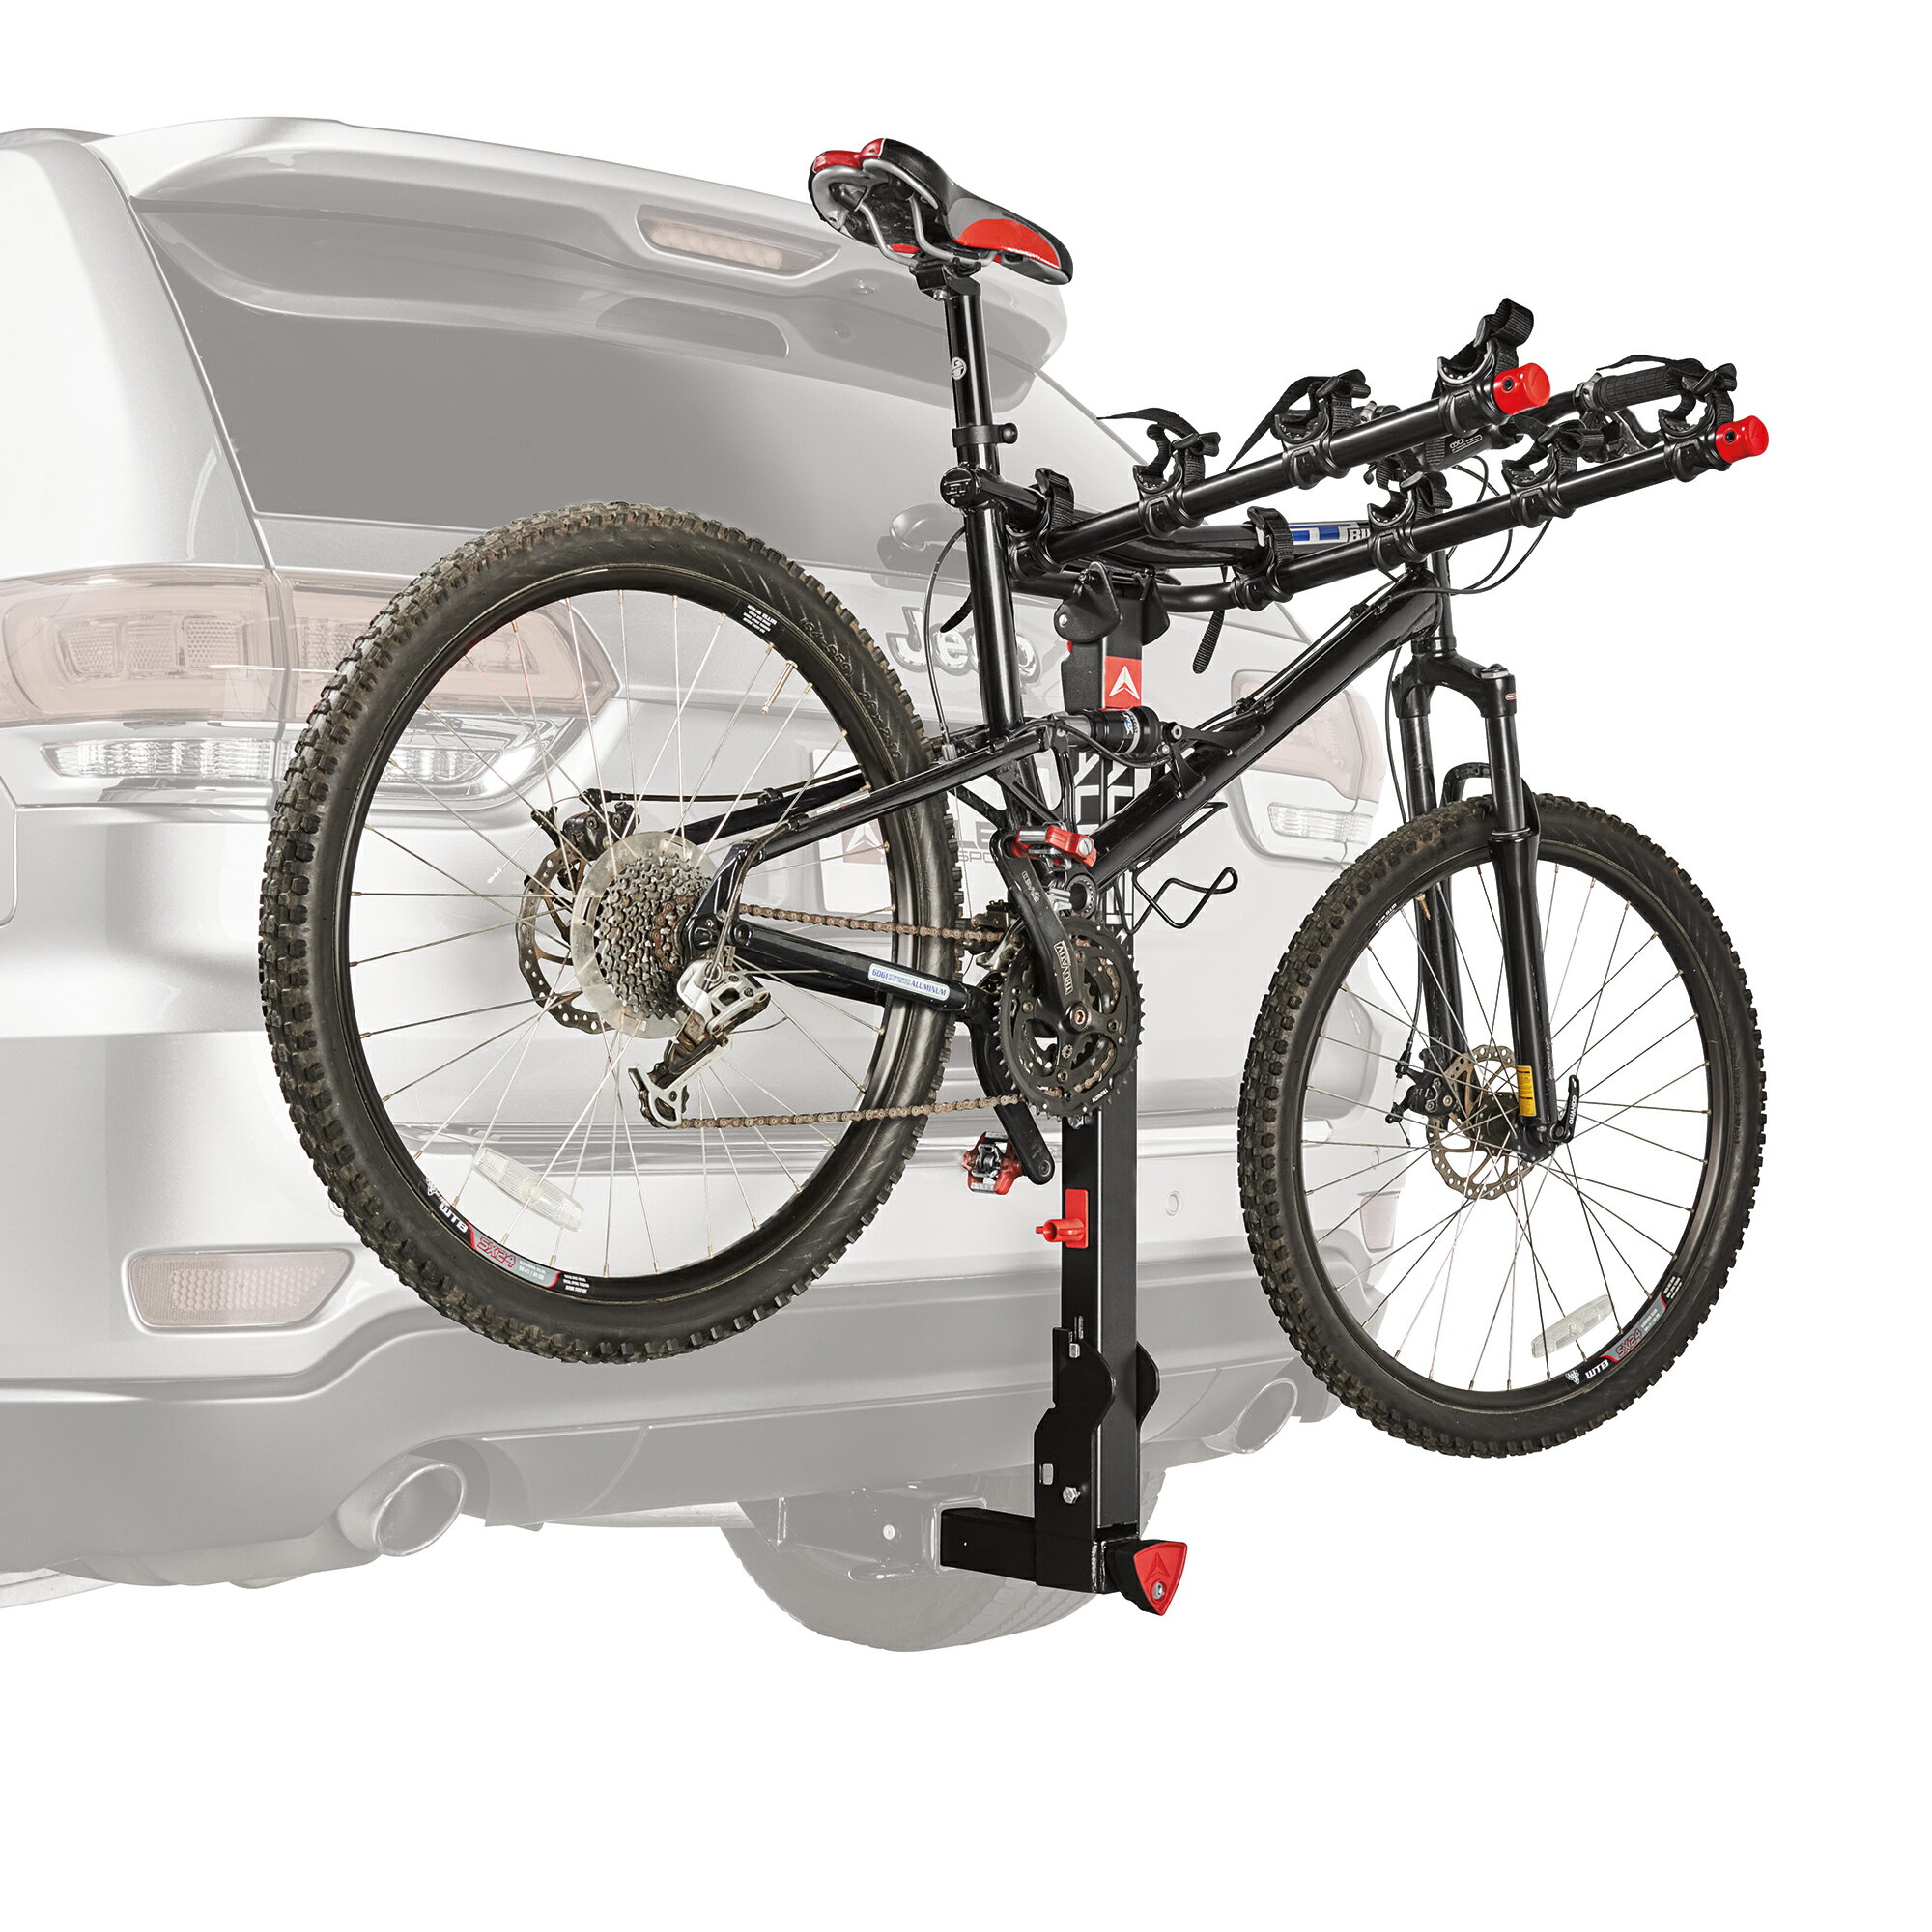 Allen Sports Deluxe Locking Quick Release 4-Bike Carrier for 2 Inch Hitch Cycling Sporting Goods Locking A Bike To A Hitch Rack